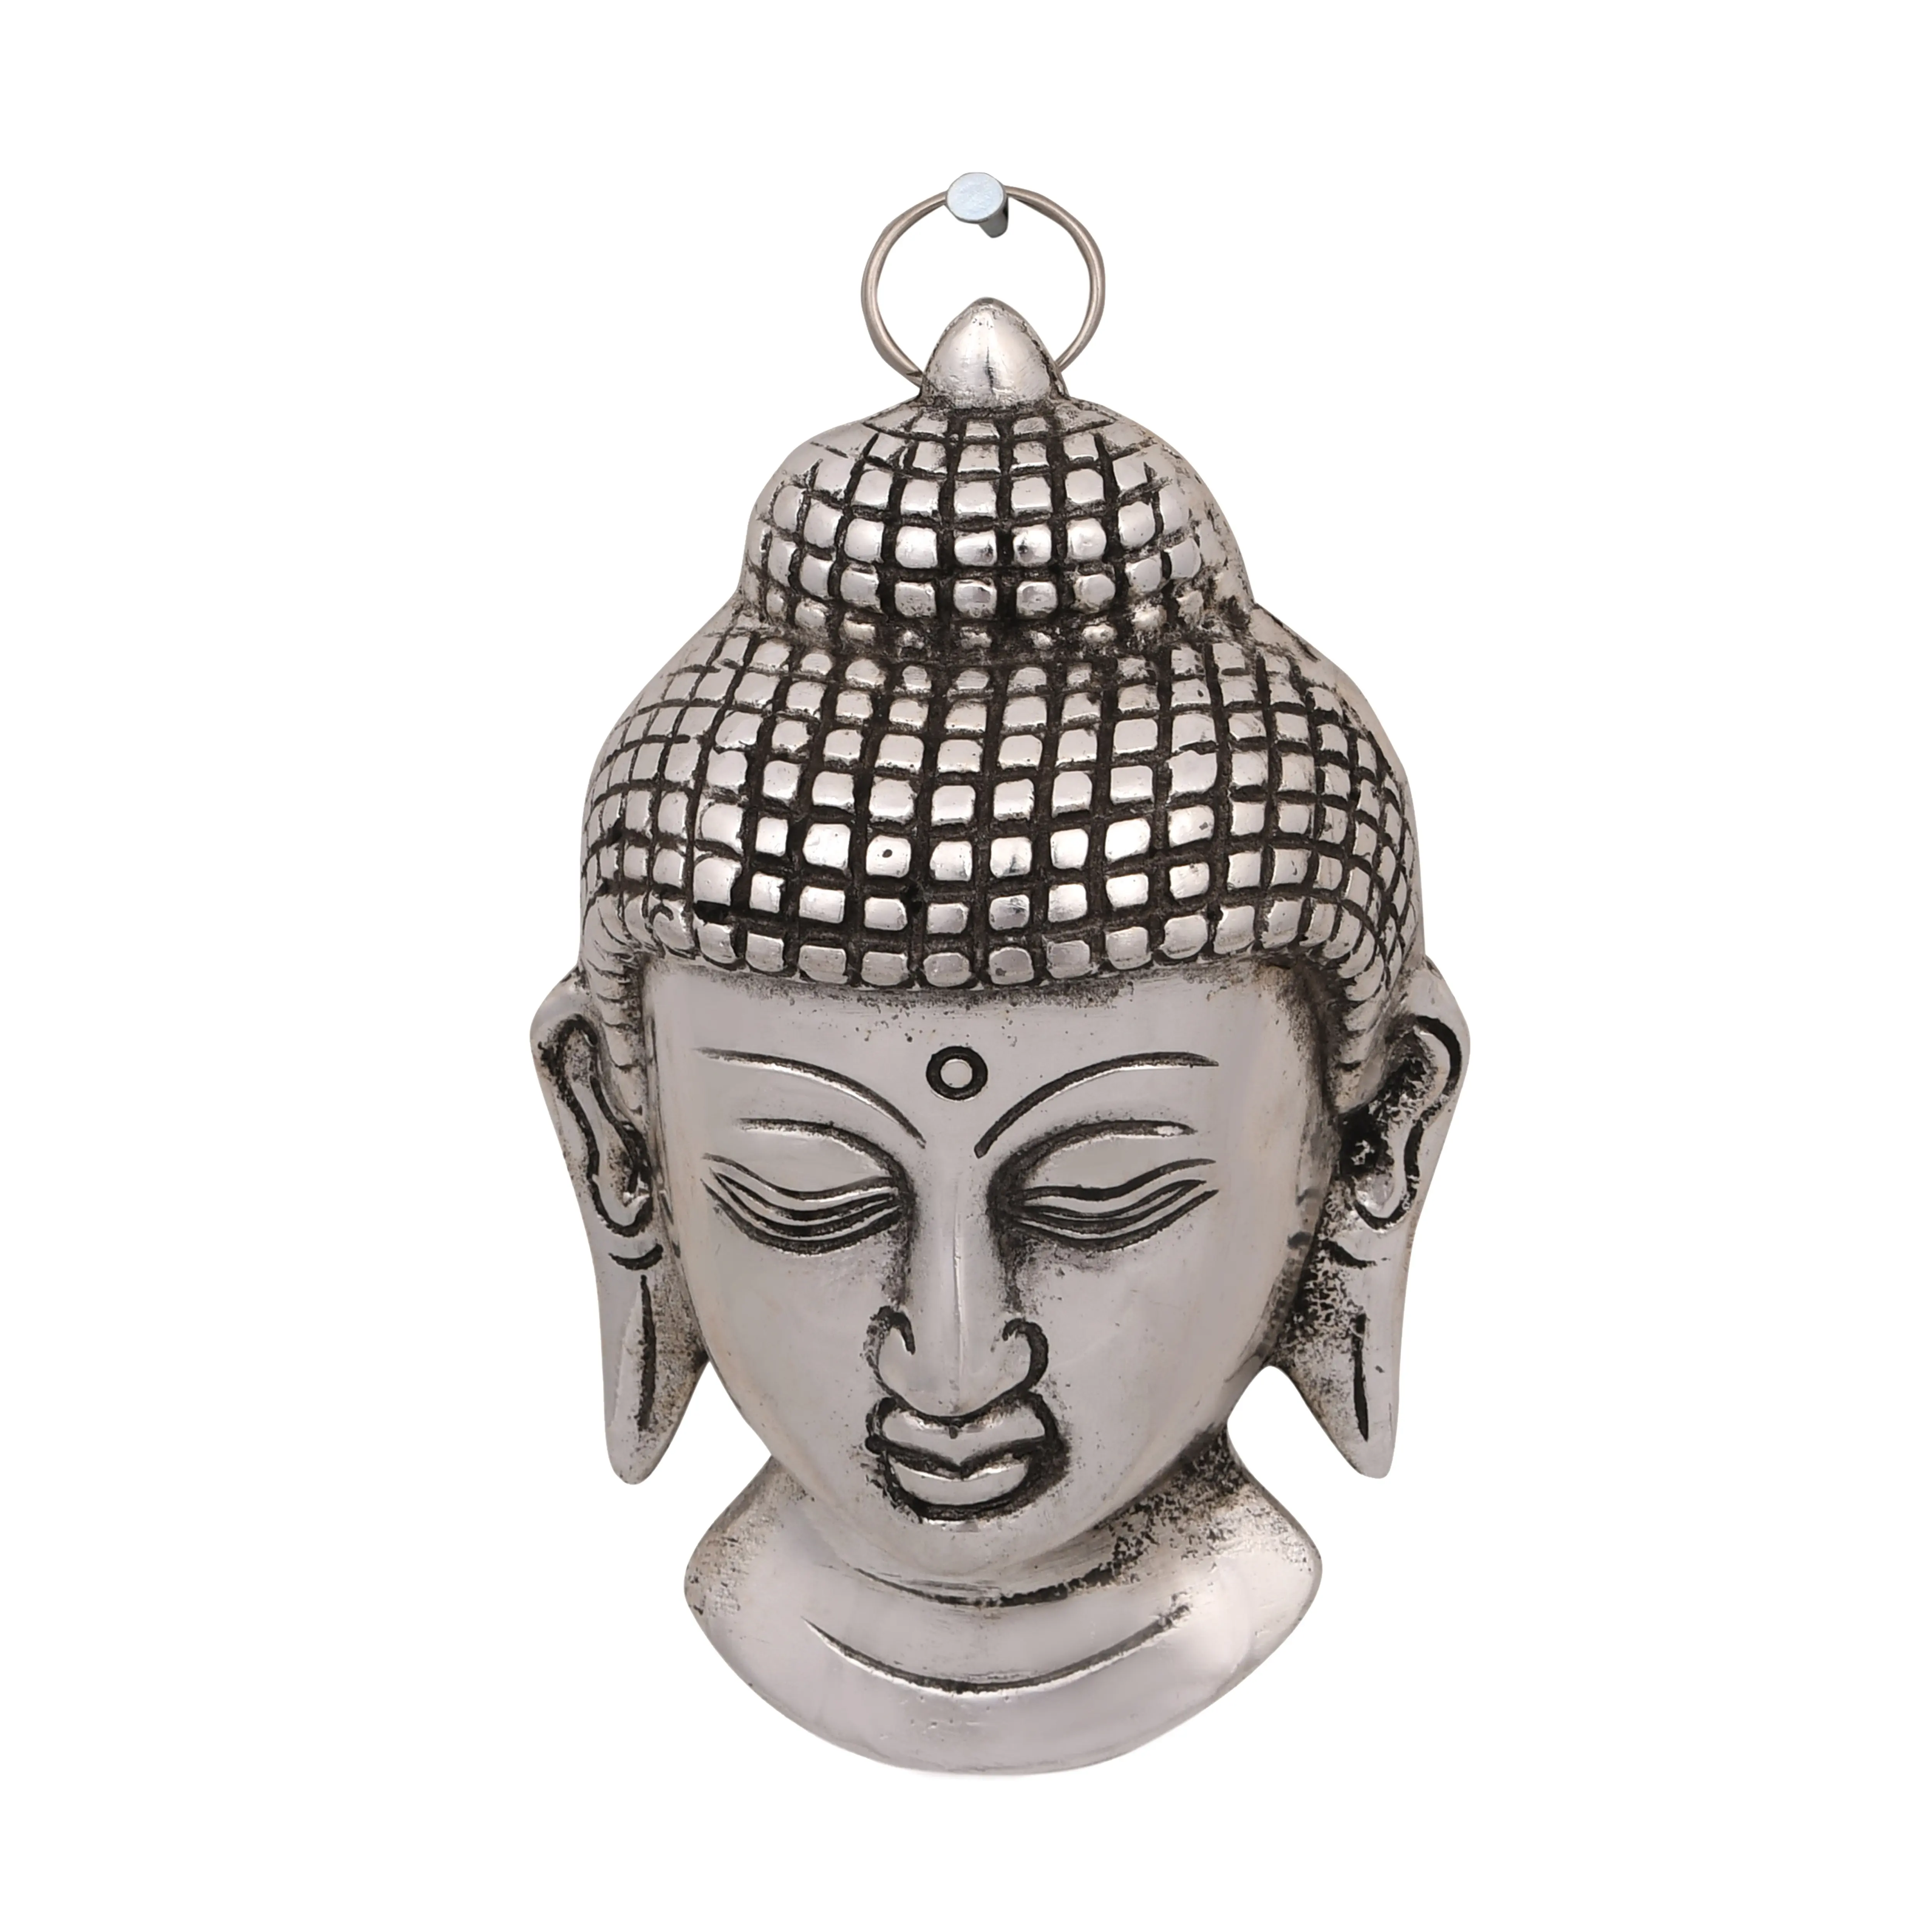 New Arrival Handmade Silver Plated Decorative Face Buddha Wall Hanging 6 inch For Home Decoration And Gifting